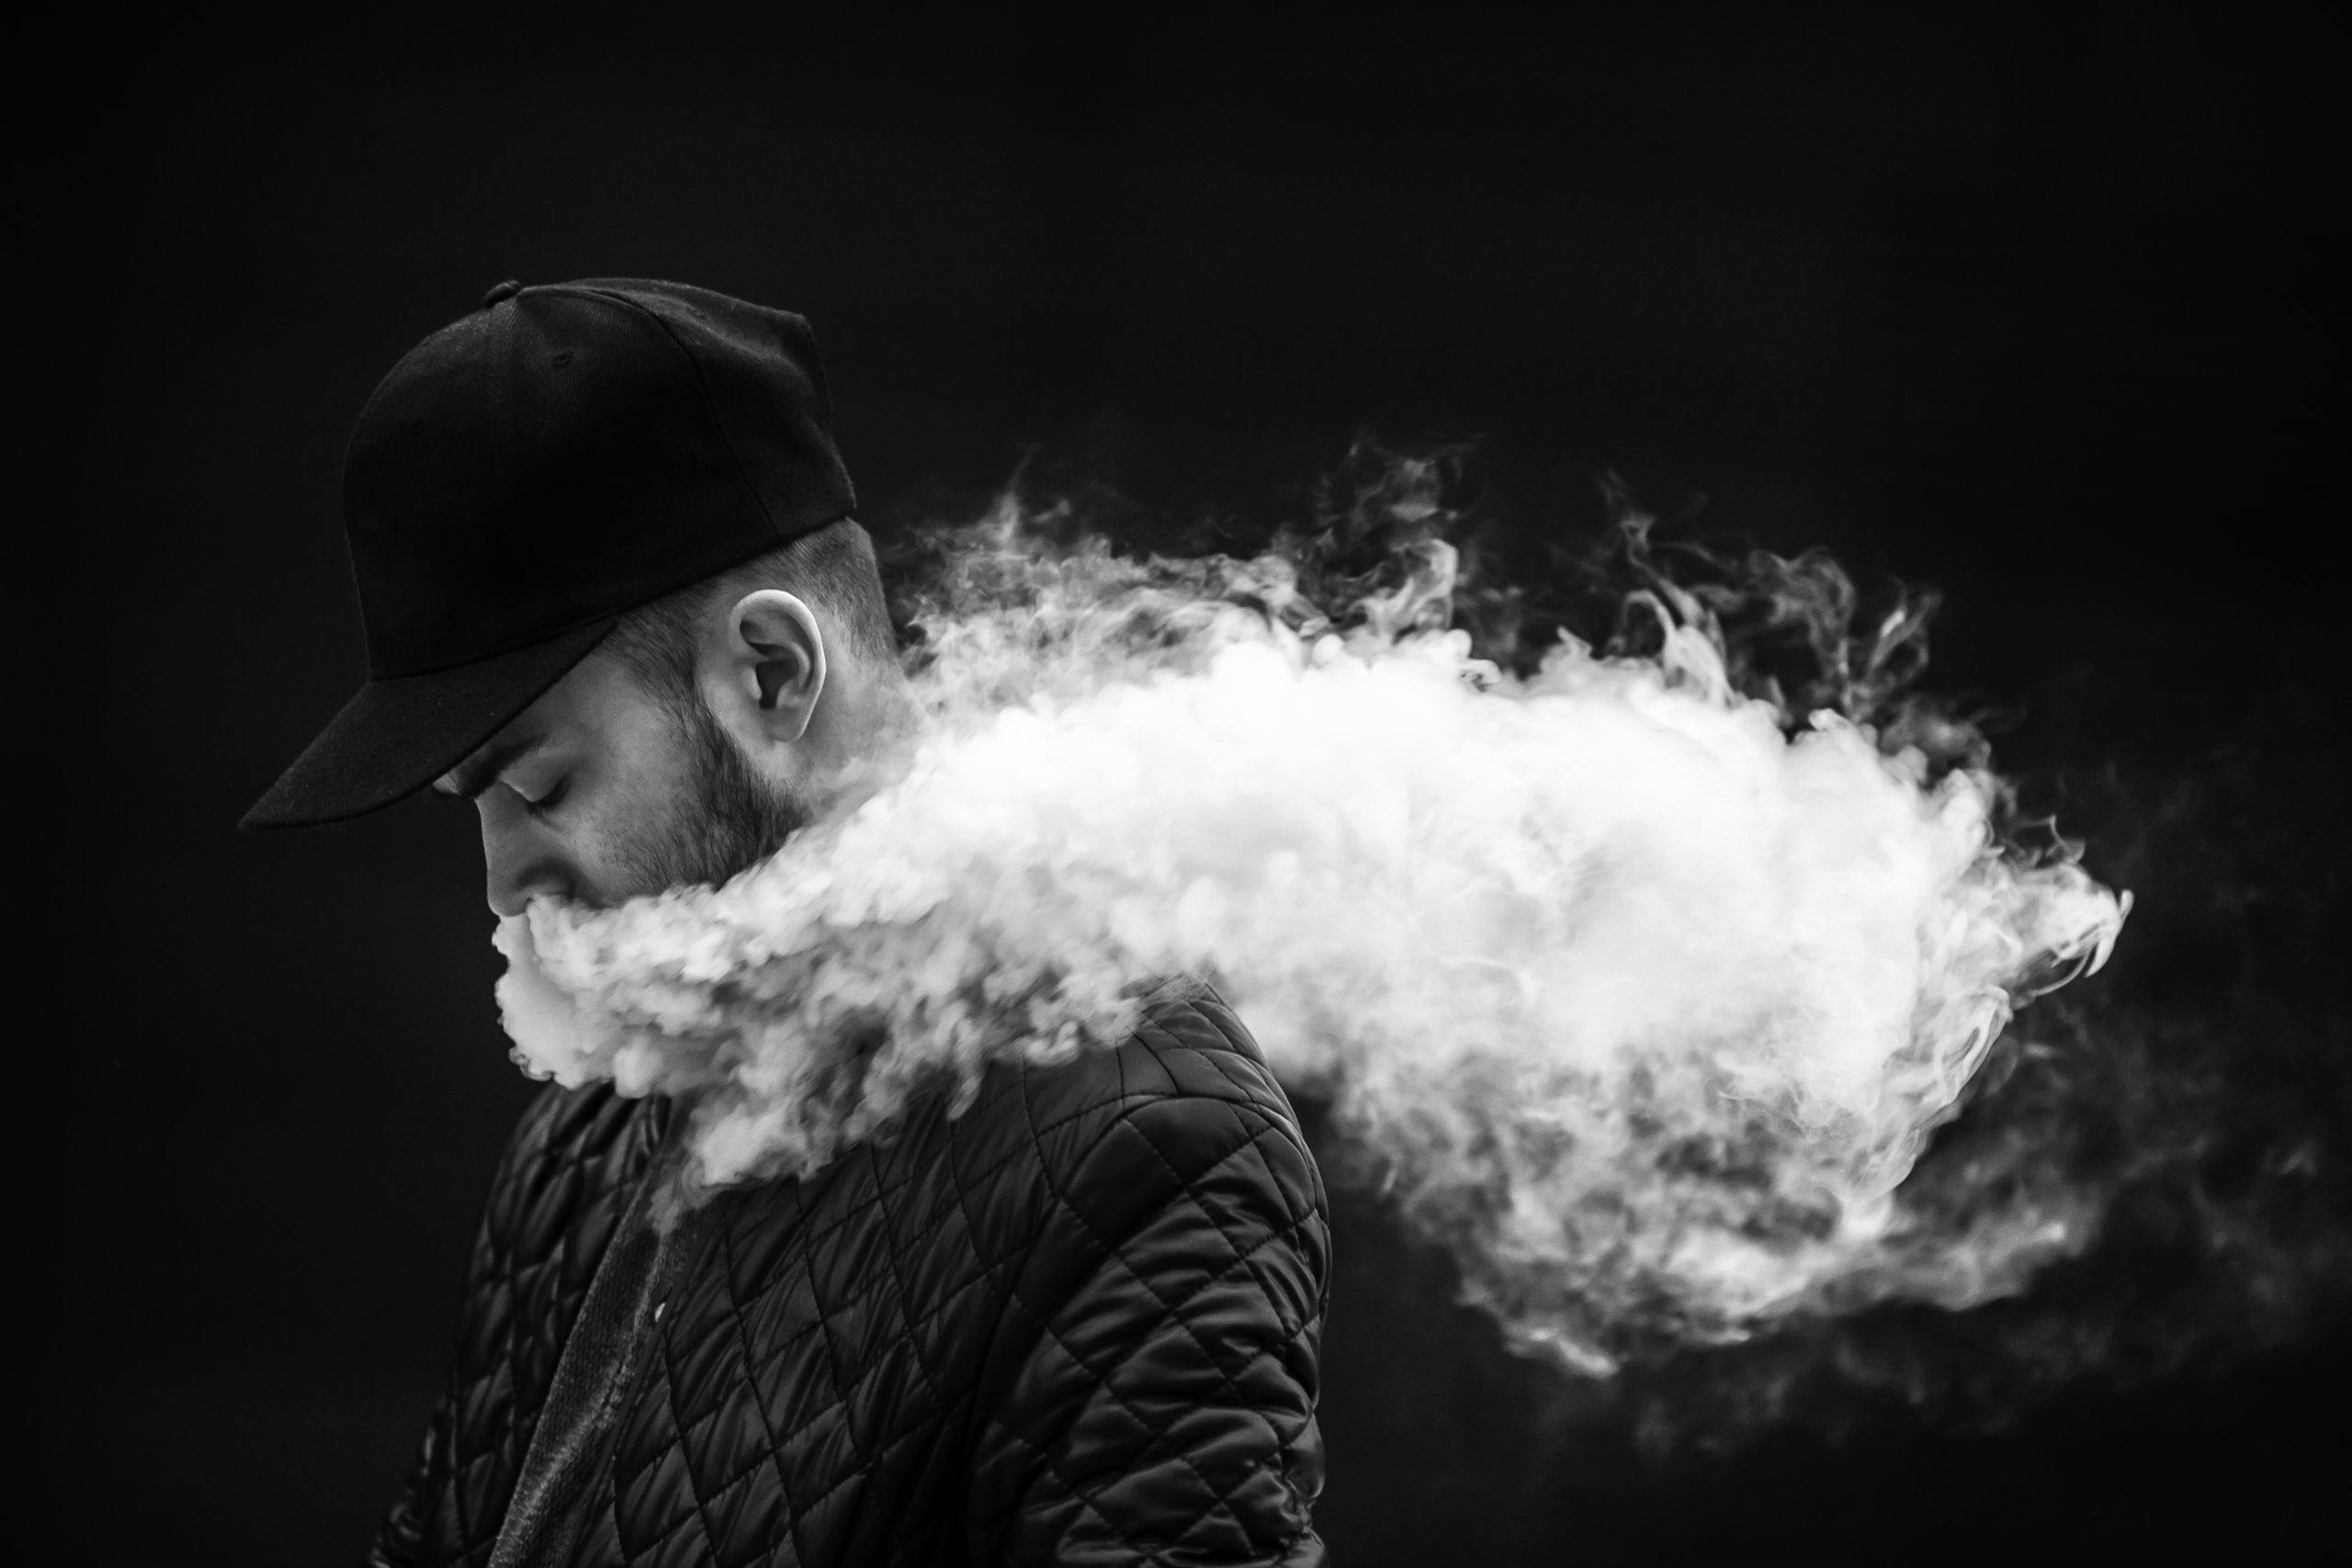 Protected: 10 Rules for Vaping at Concerts